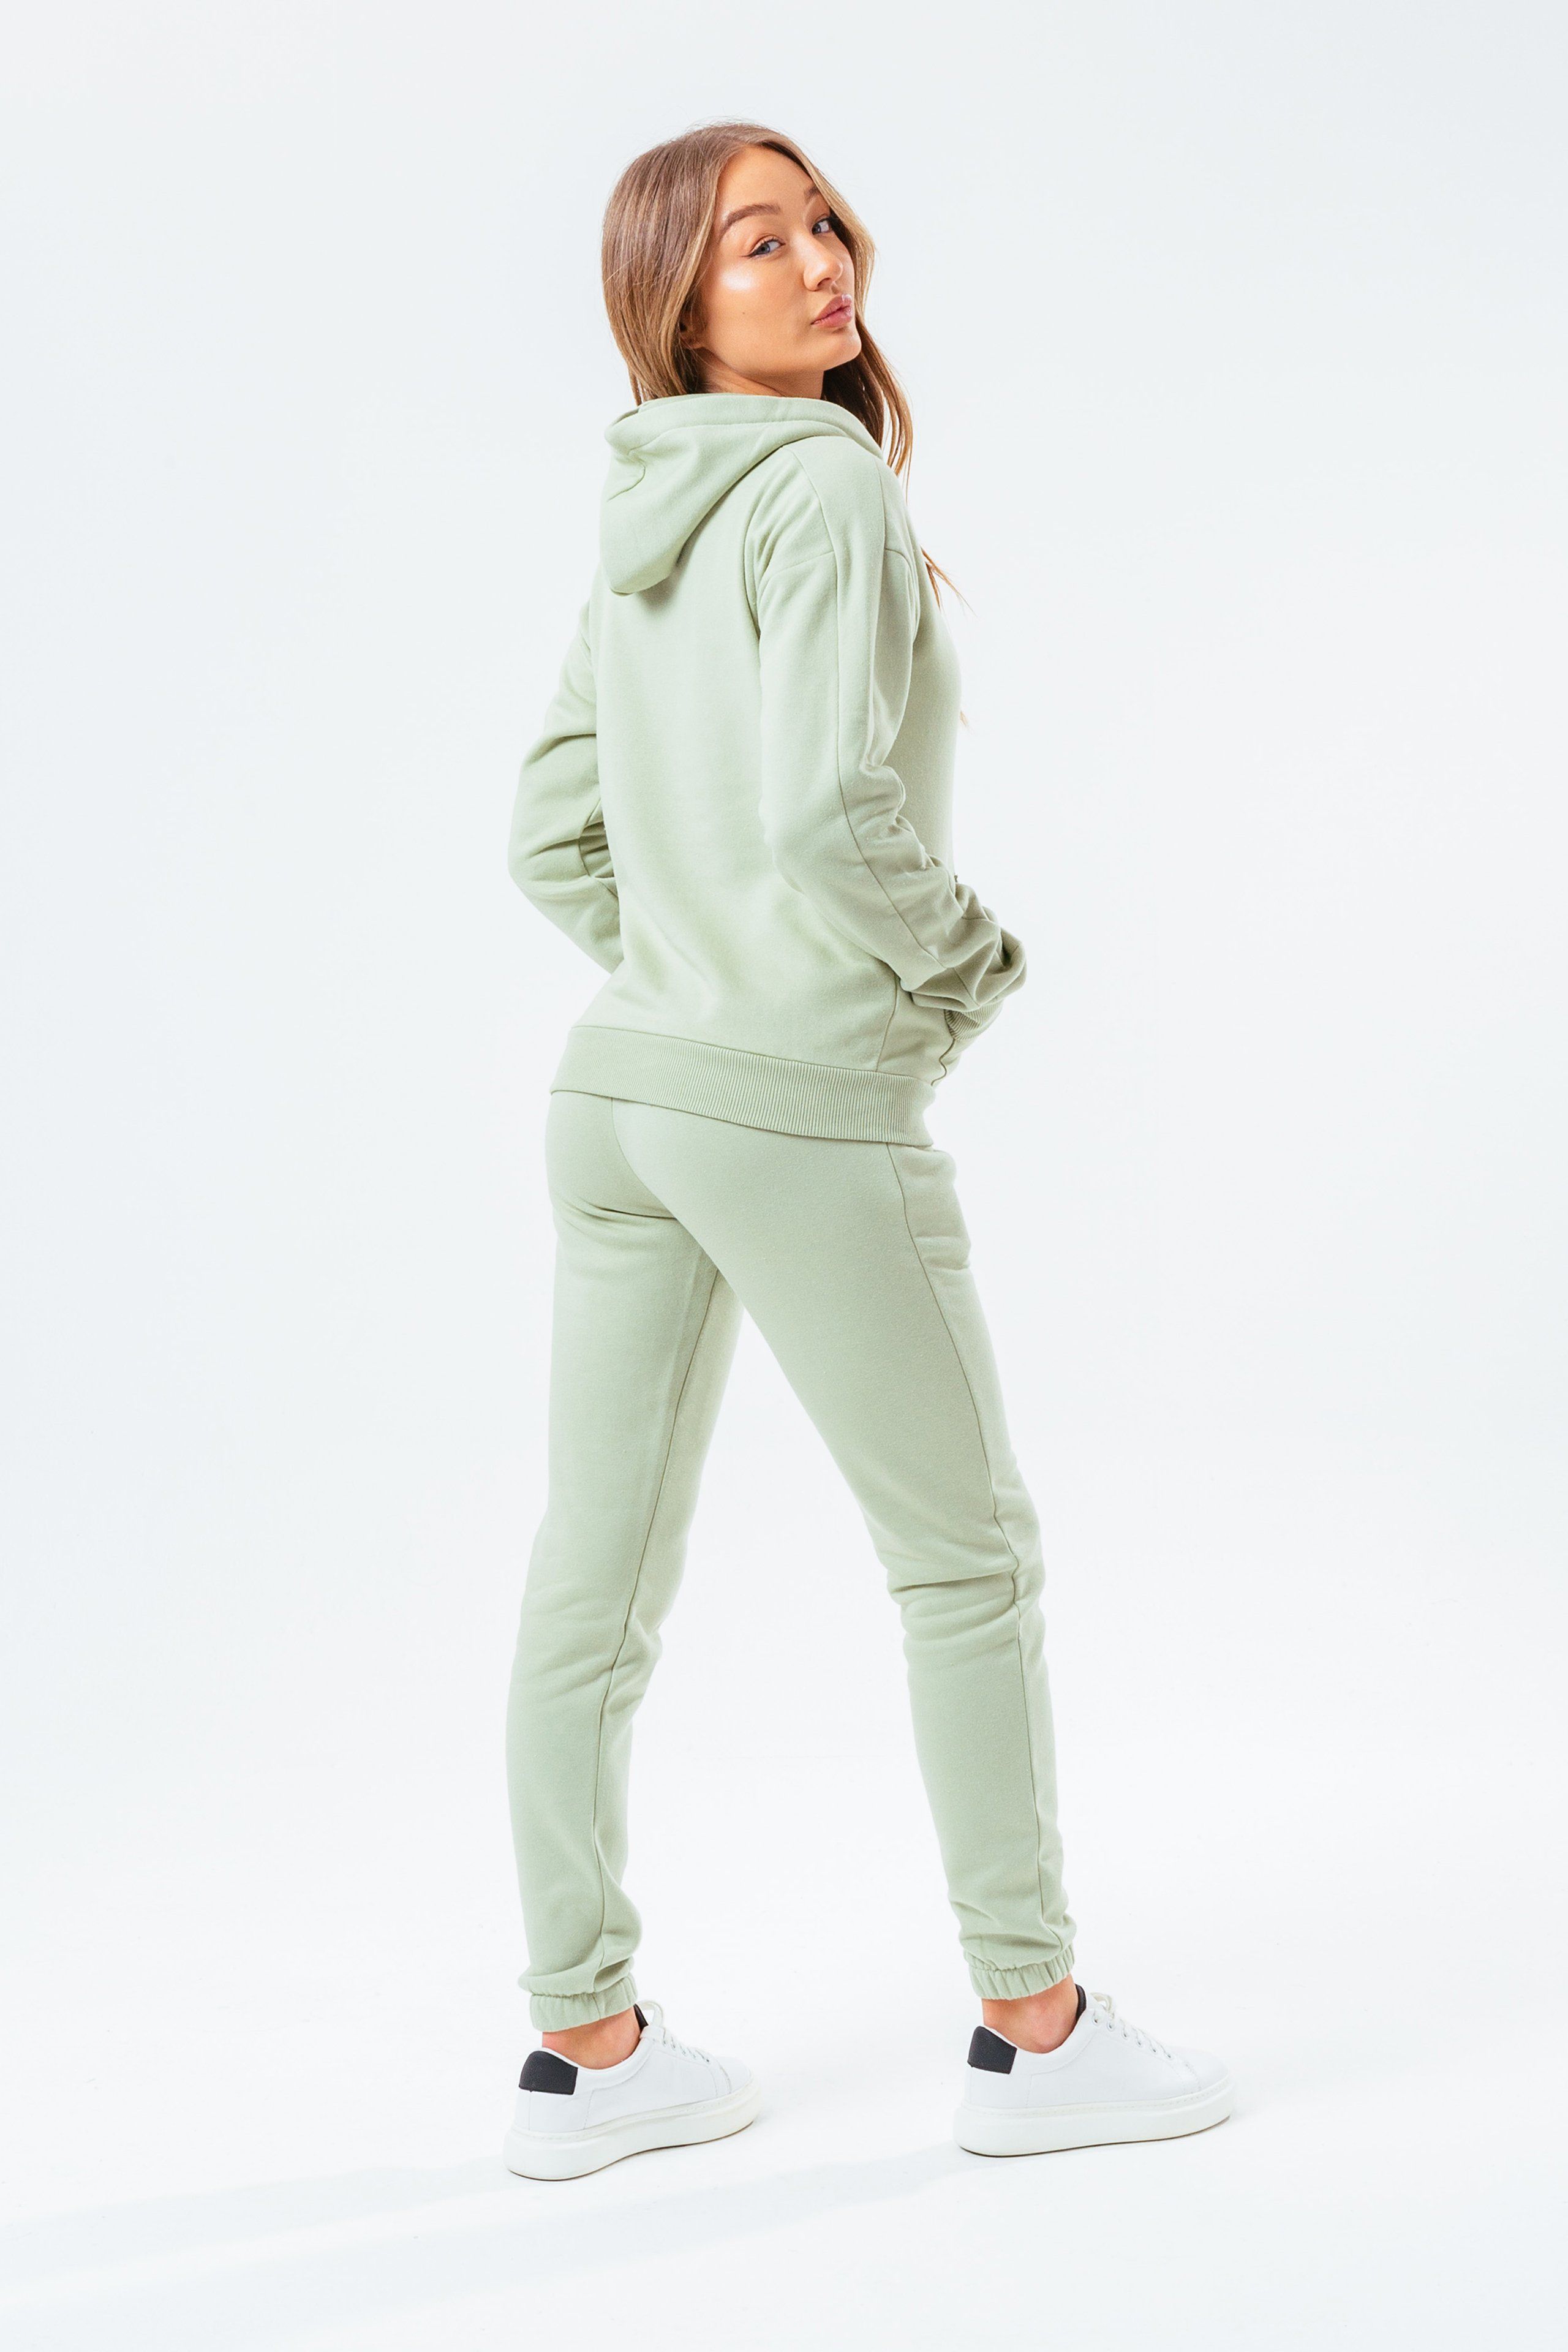 Introducing the HYPE. Olive Oversized Women's Pullover Hoodie, designed in a pastel mint colour palette. In our oversized women's hoodie shape, in a 80% cotton and 20% polyester fabric for the ultimate comfort. With a fixed hood, fitted hem and cuffs, kangaroo pocket and embossed monochrome drawstring pullers. Wear with the matching joggers for your next loungewear look. Machine washable.